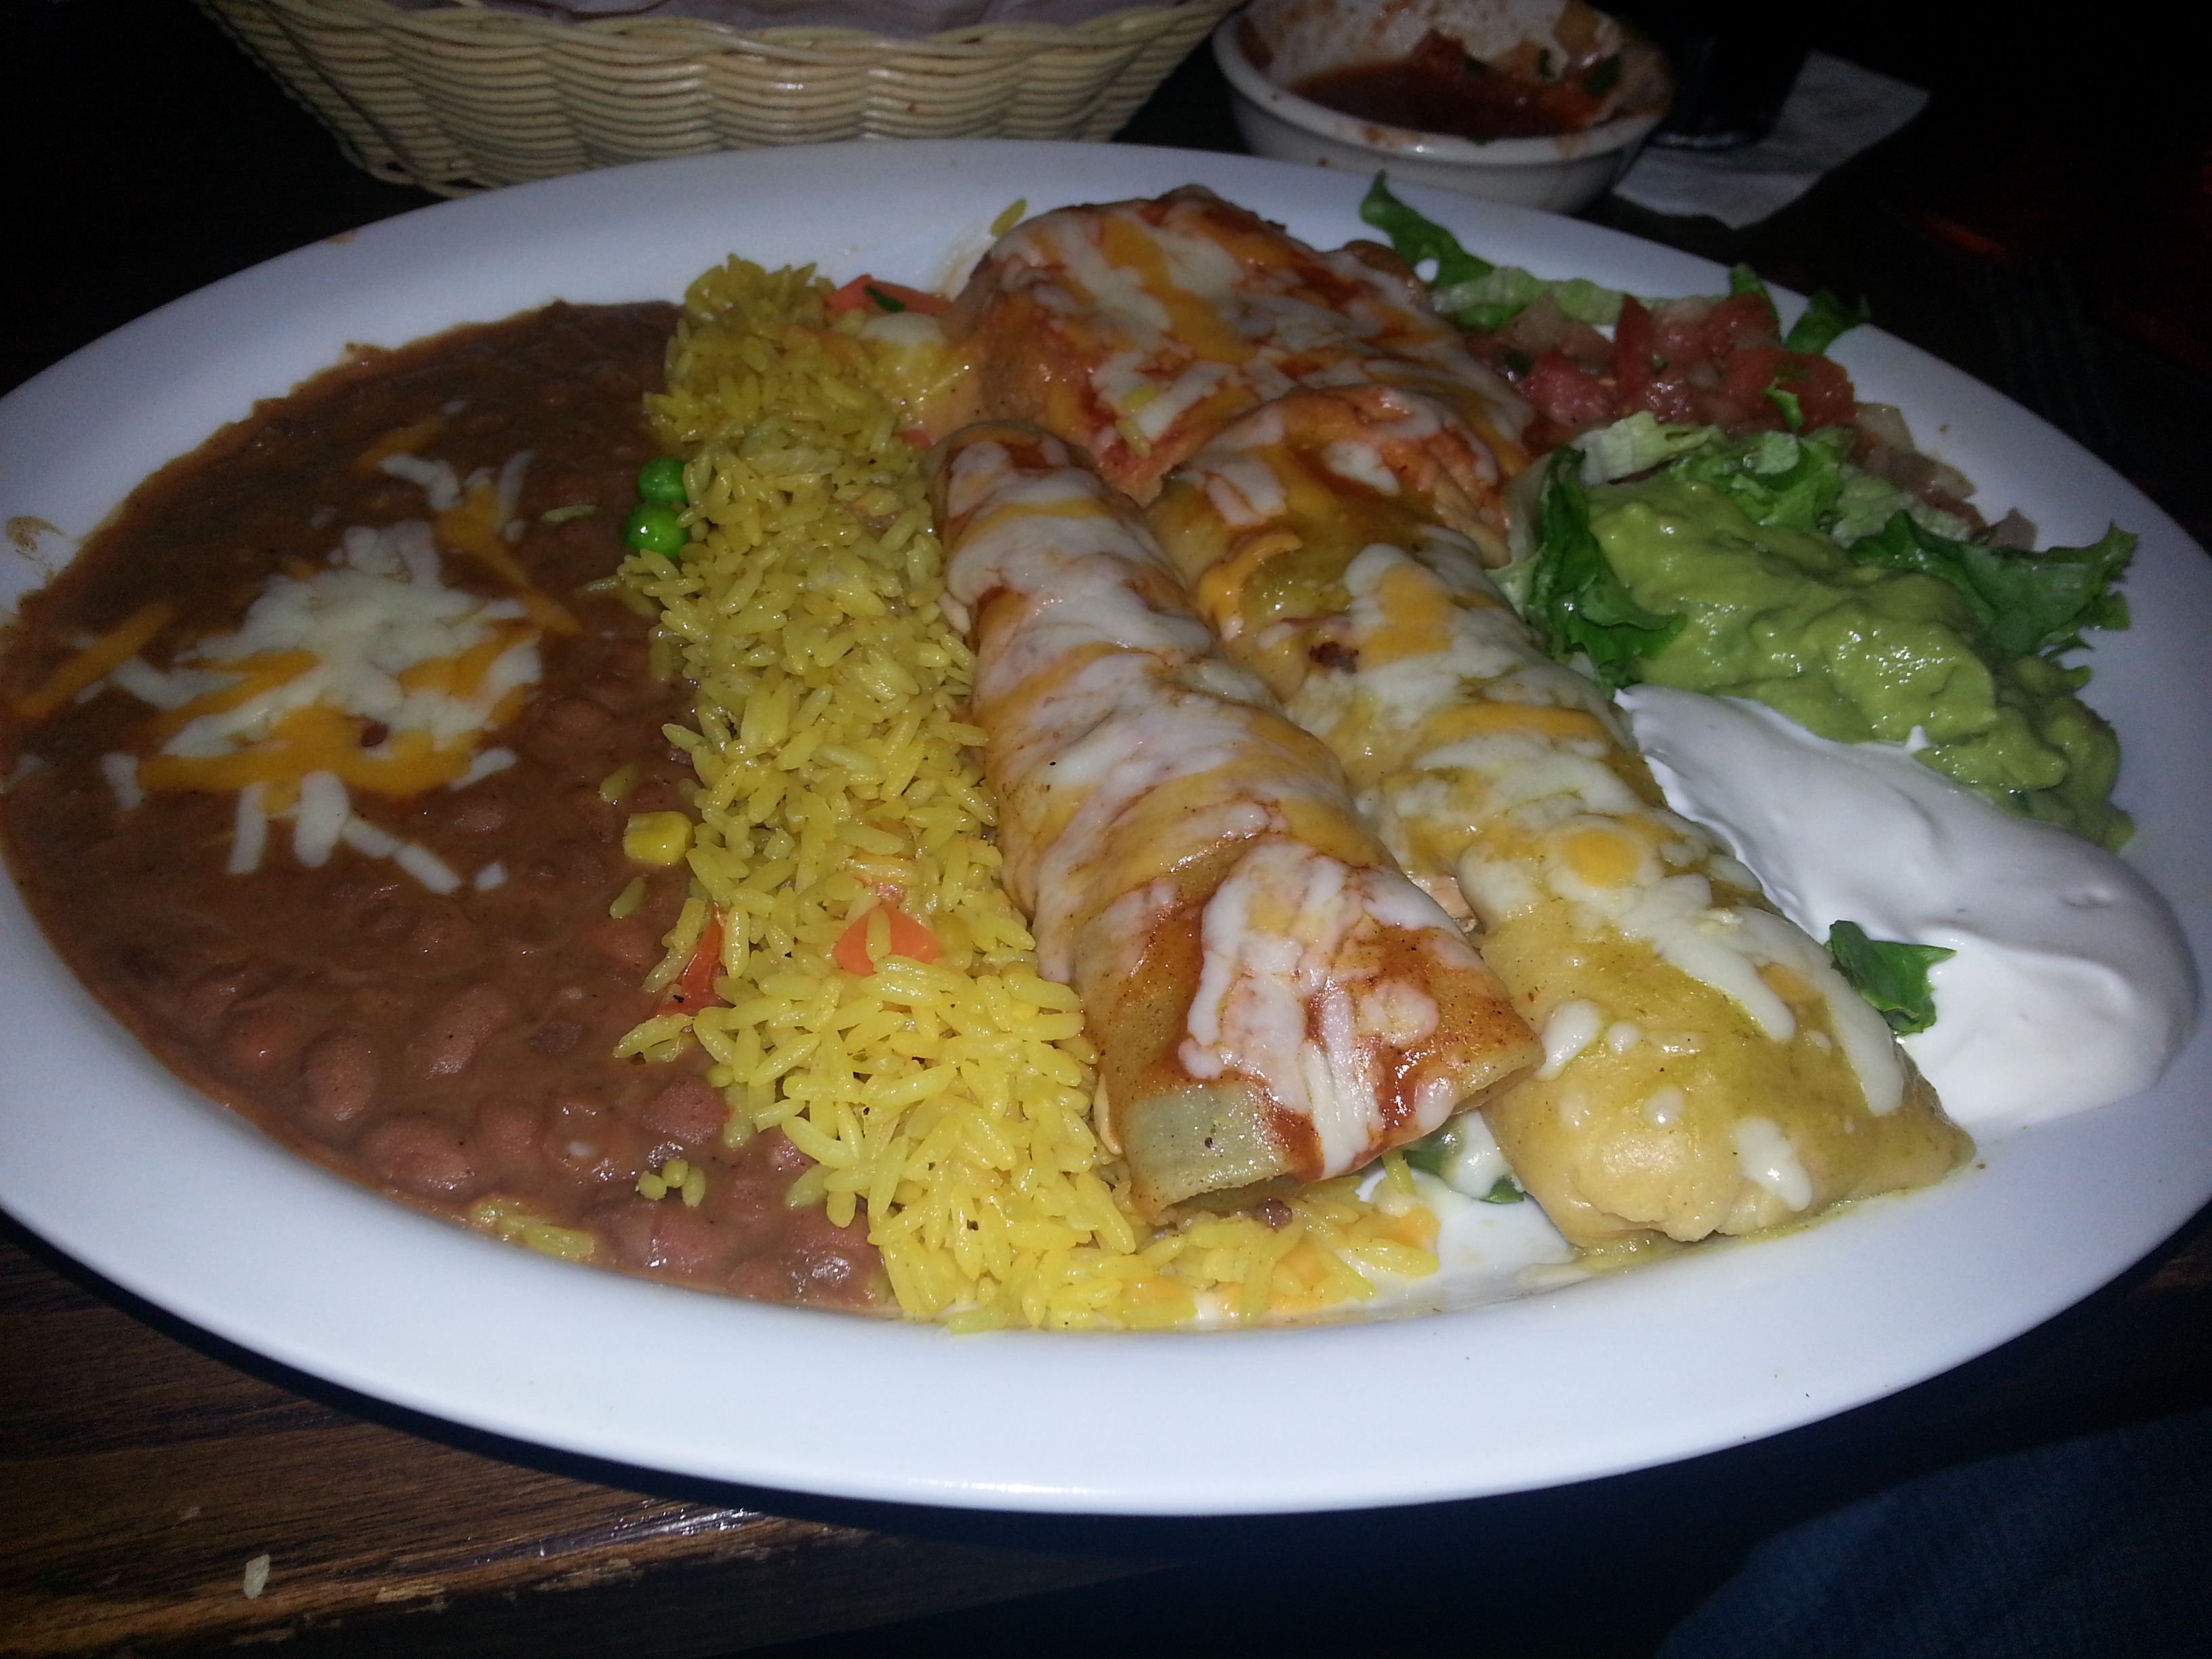 El Tio's Mexican platter with (l to r) refried beans, Mexican rice, beef enchilada, chile rellano (rear), chicken tamale (front), pica de gallo, lettuce, guacamole and sour cream. (Photo: Mark Heckathorn/DC on Heels)